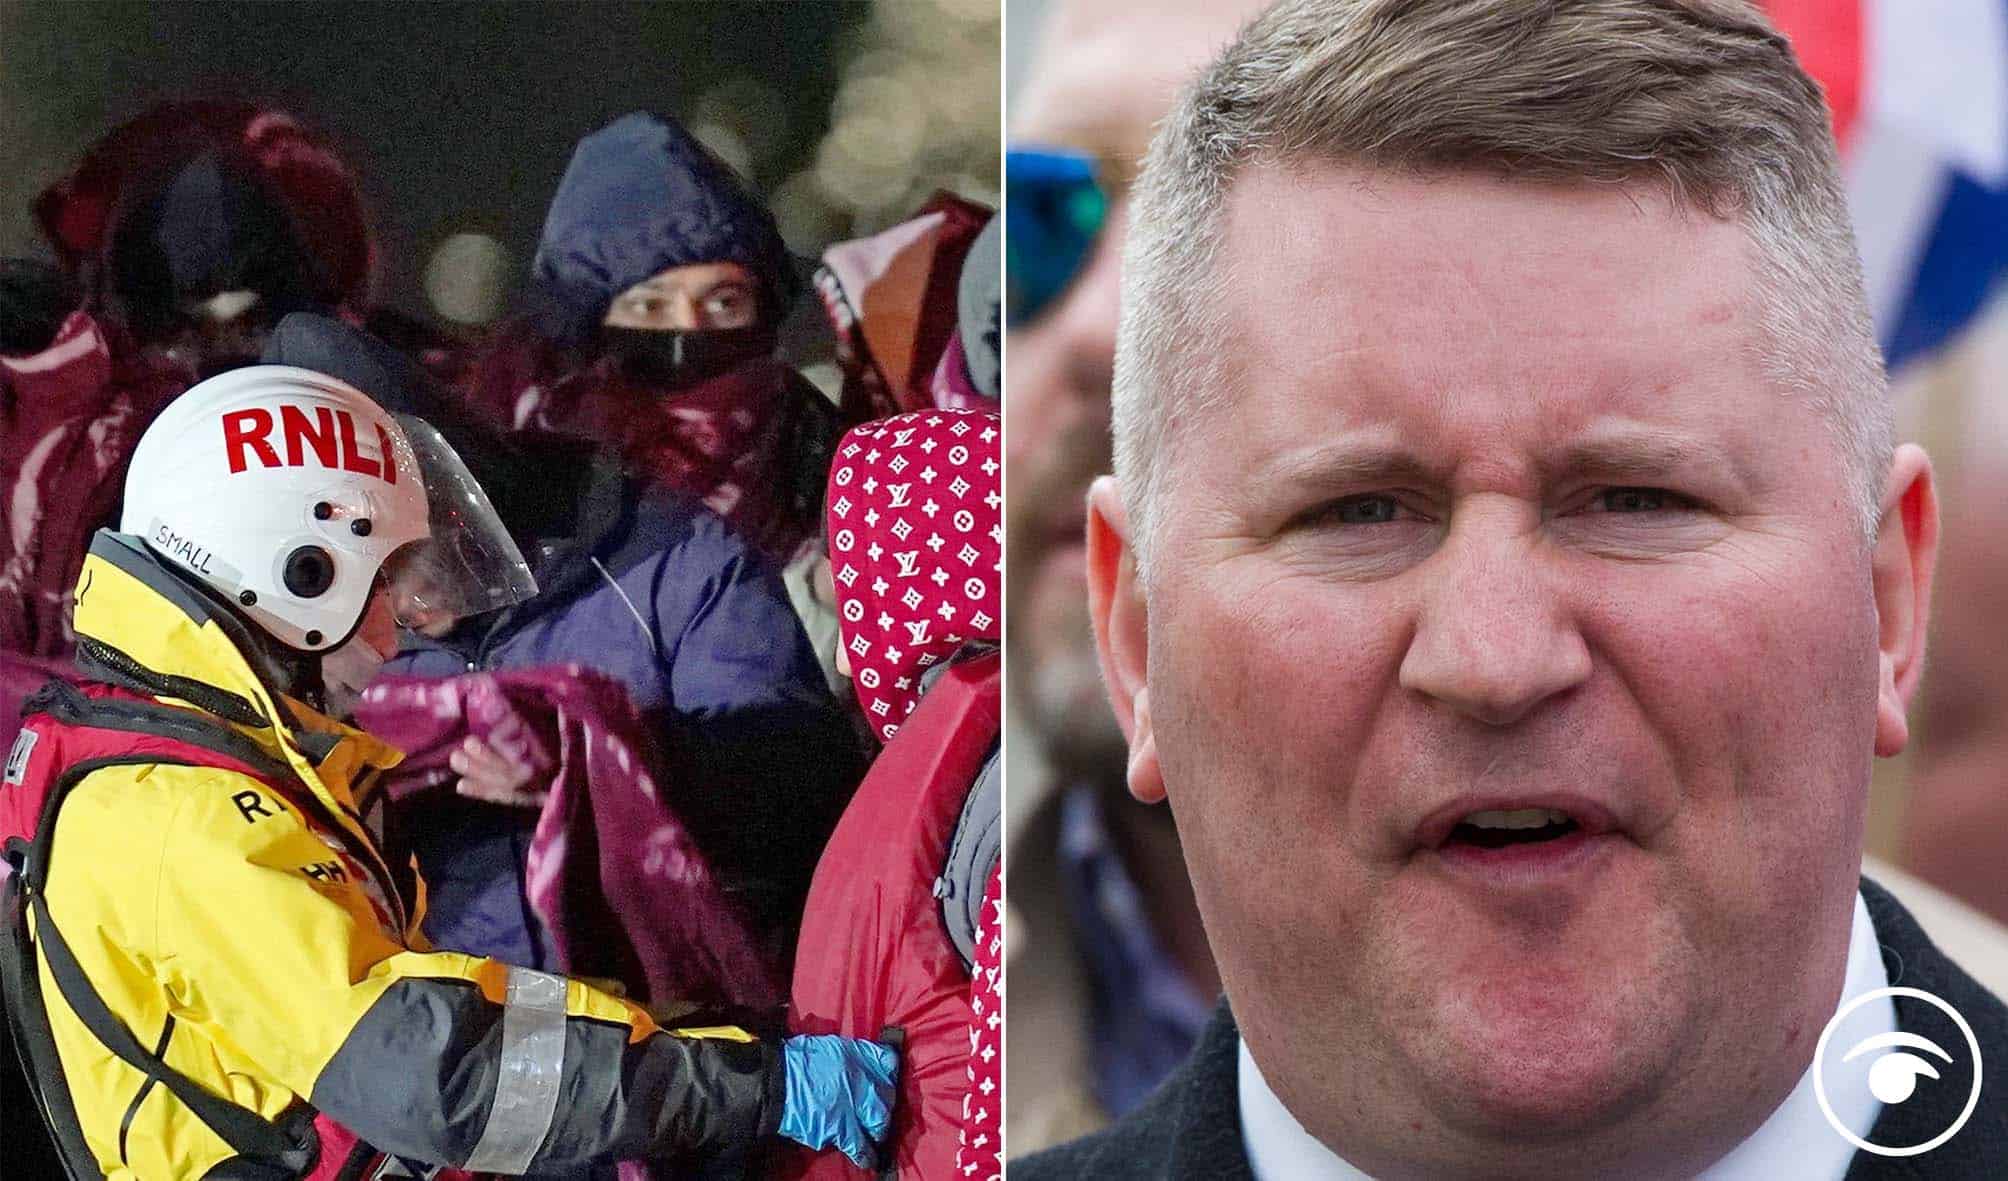 Support for RNLI amid hate campaign by Britain First as 100 migrants saved last night